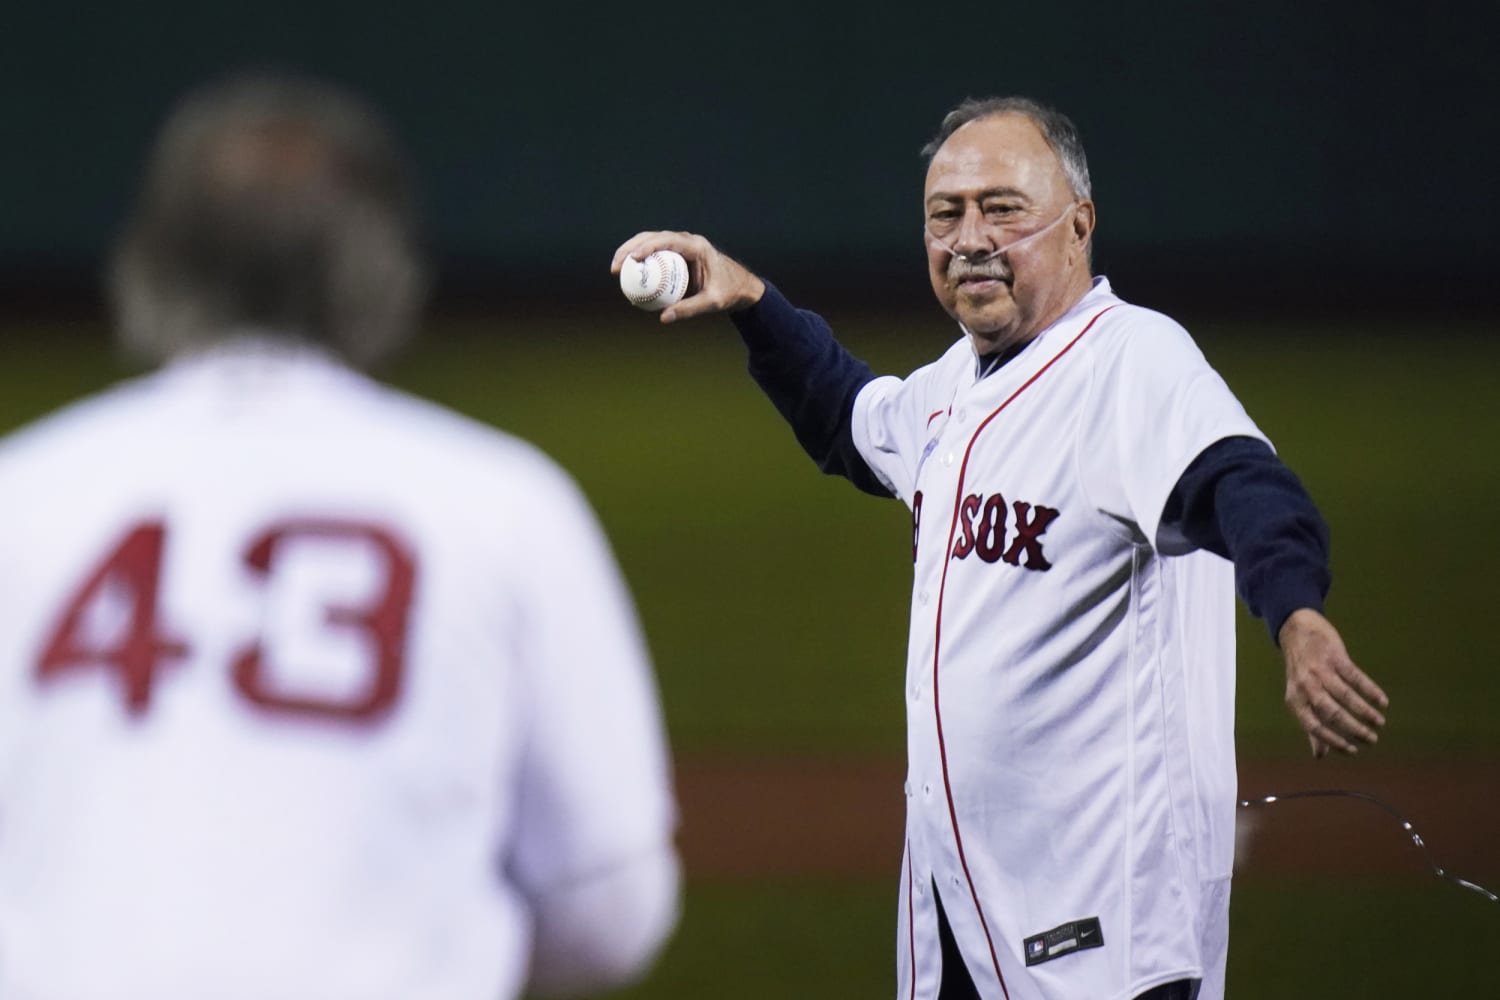 Jerry Remy, beloved Red Sox broadcaster, dies at 68 – NBC Sports